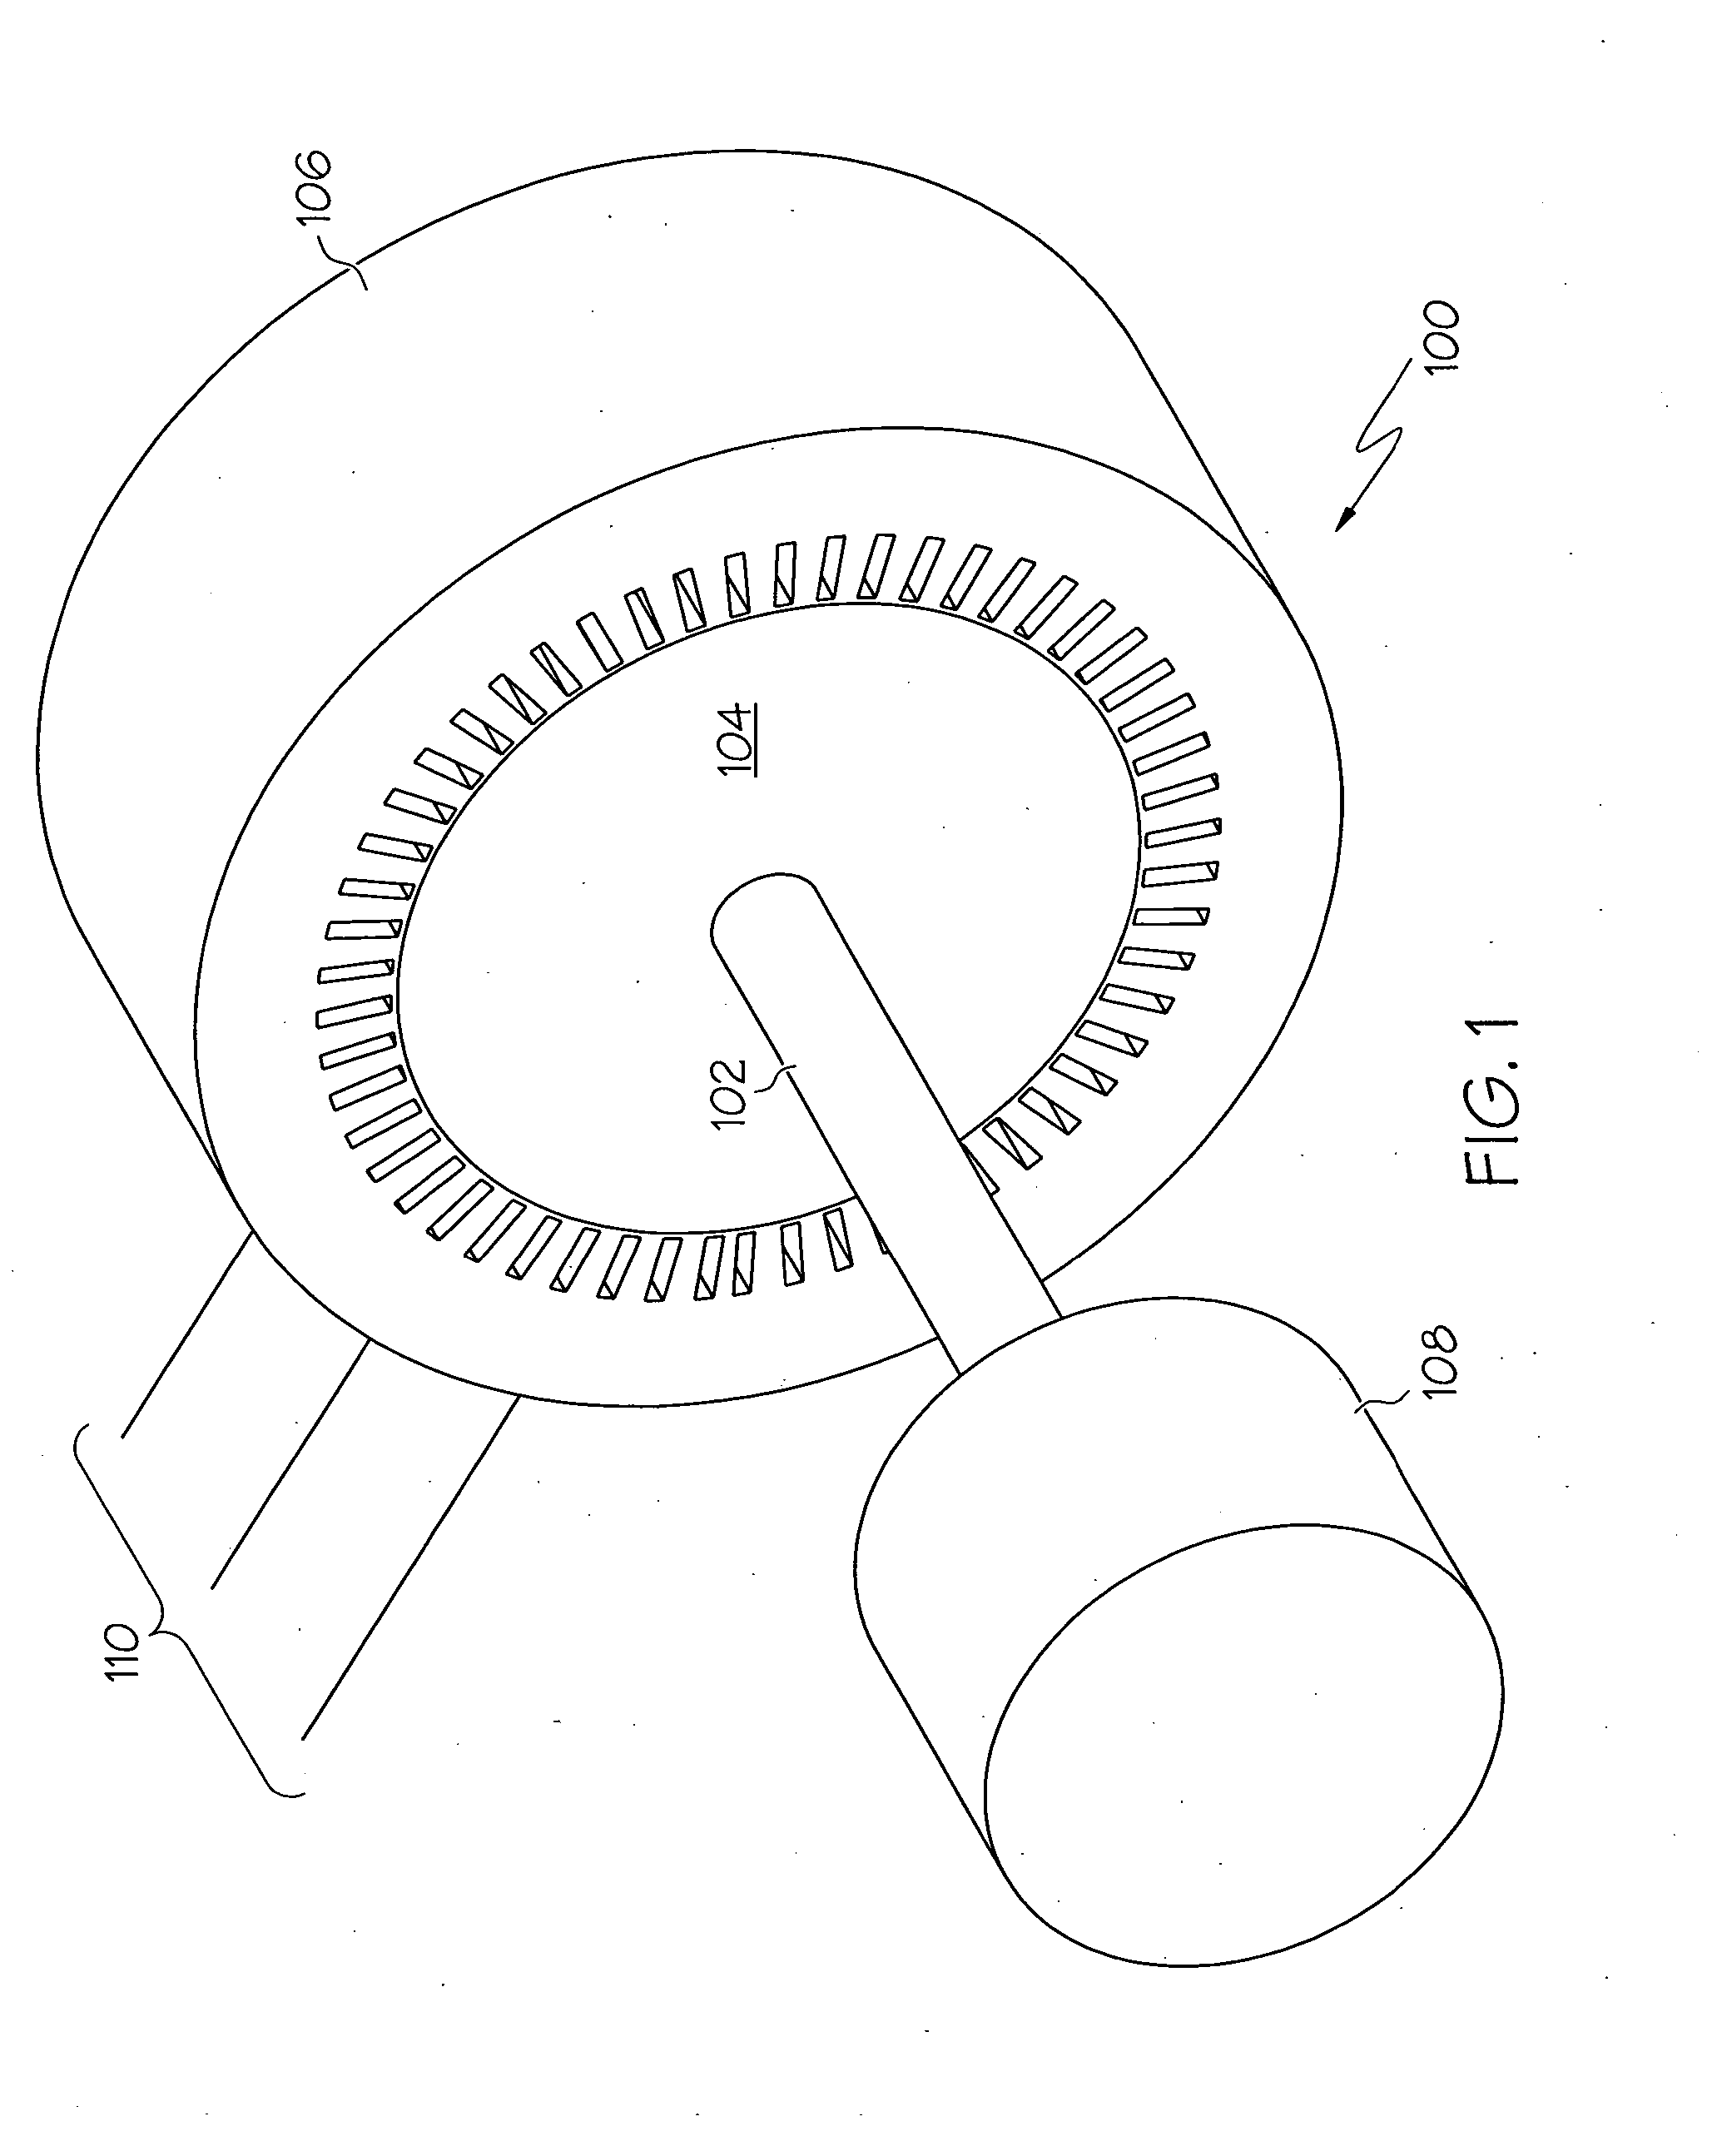 System and method for direct liquid cooling of electric machines